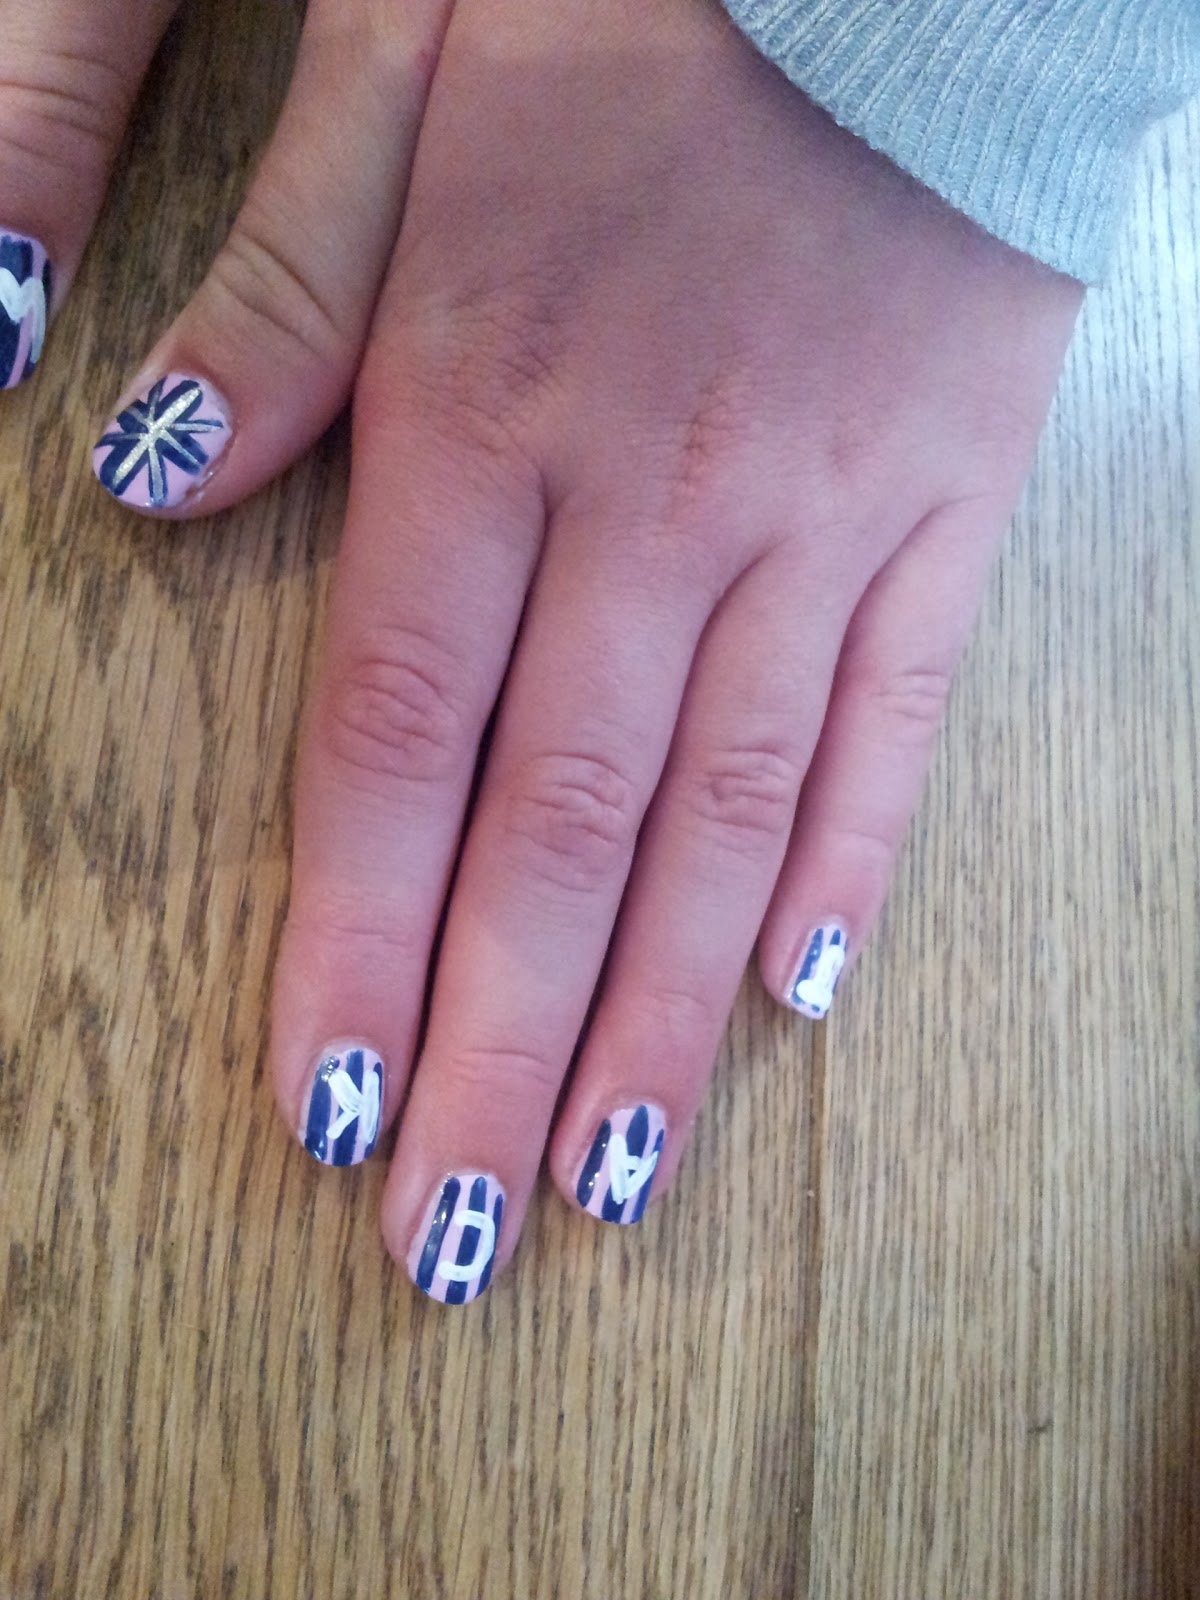 Pamper Party Nails - Jack Wills Inspired